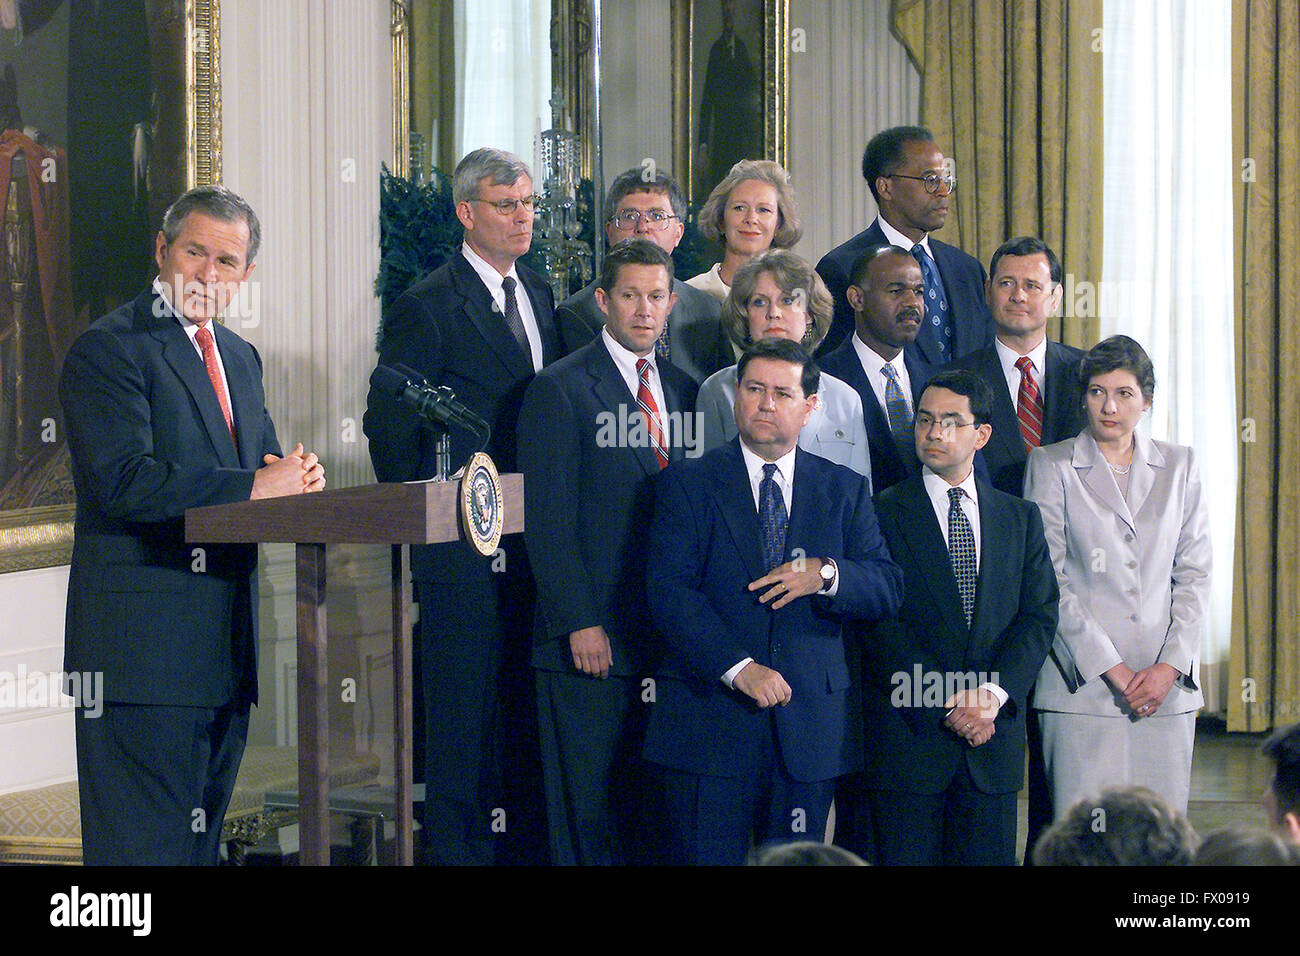 United States President George W. Bush with 11 of his first nominees for Federal judiciary nominations in an event in the East Room of the White House, May 9, 2001. The judges, left to right, Front row, Judge Dennis Shedd, Migues Estrada and Judge Priscilla Owens; Second row, Jeffrey Sutton, Judge Edith Brown Clement, Judge Roger Gregory and John Roberts; Back row, Judge Terrence Boyle, Michael McConnell, Judge Deborah Cook and Judge Barrington Parker. Credit: CNP - NO WIRE SERVICE - Stock Photo